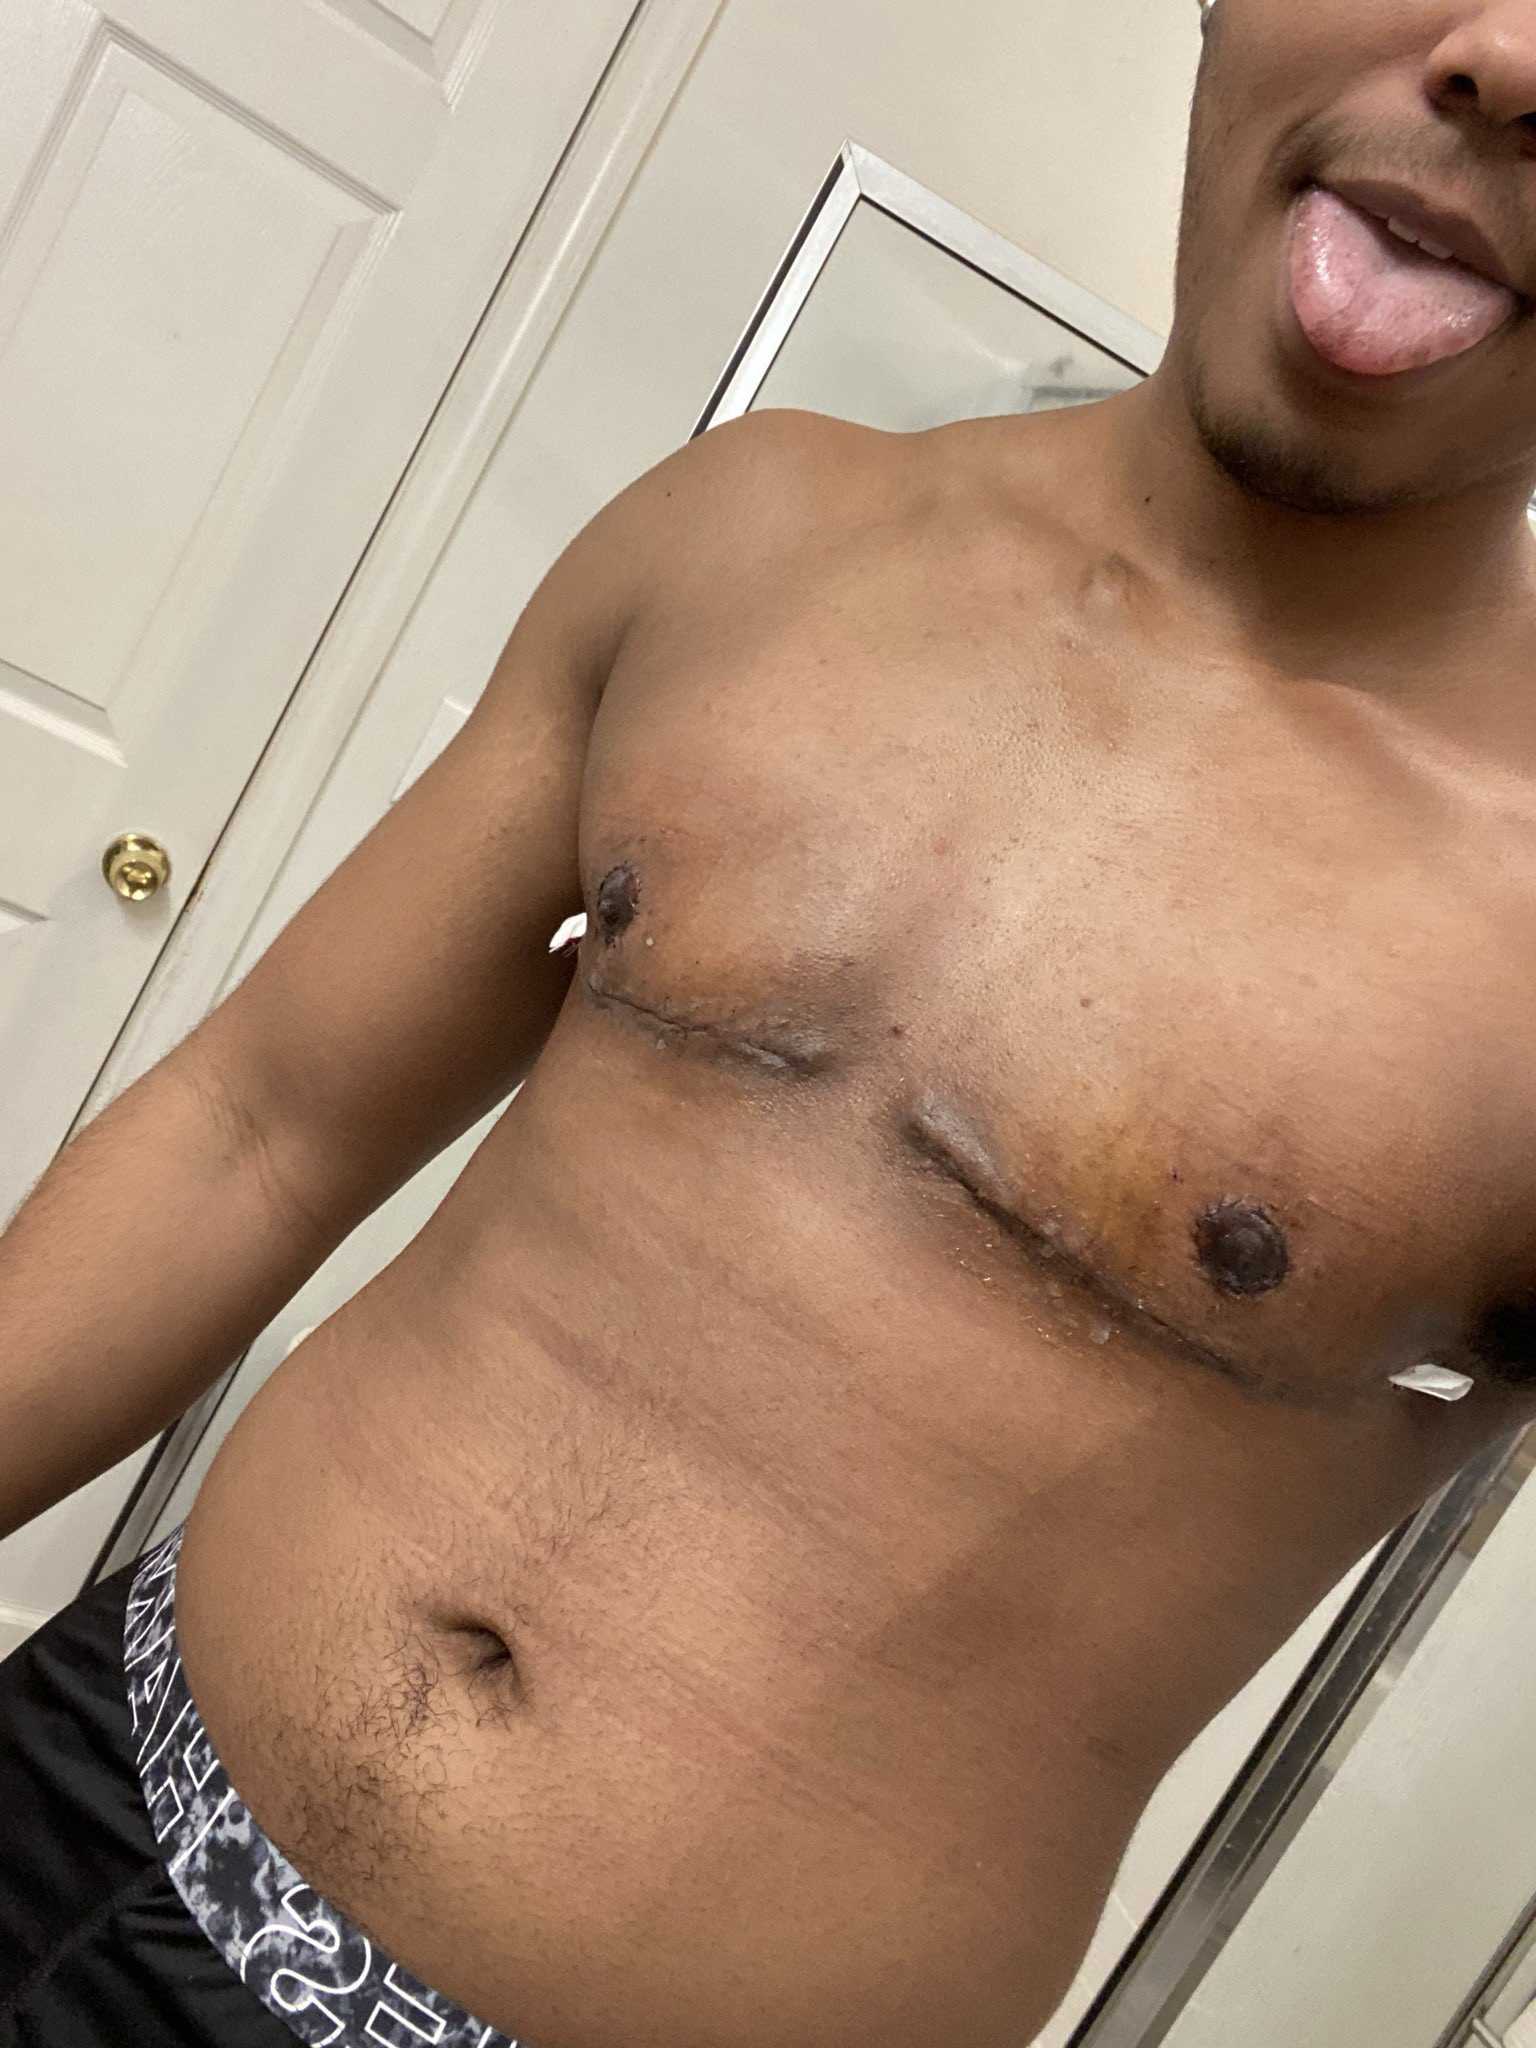 Transgender man proudly shows off his chest 